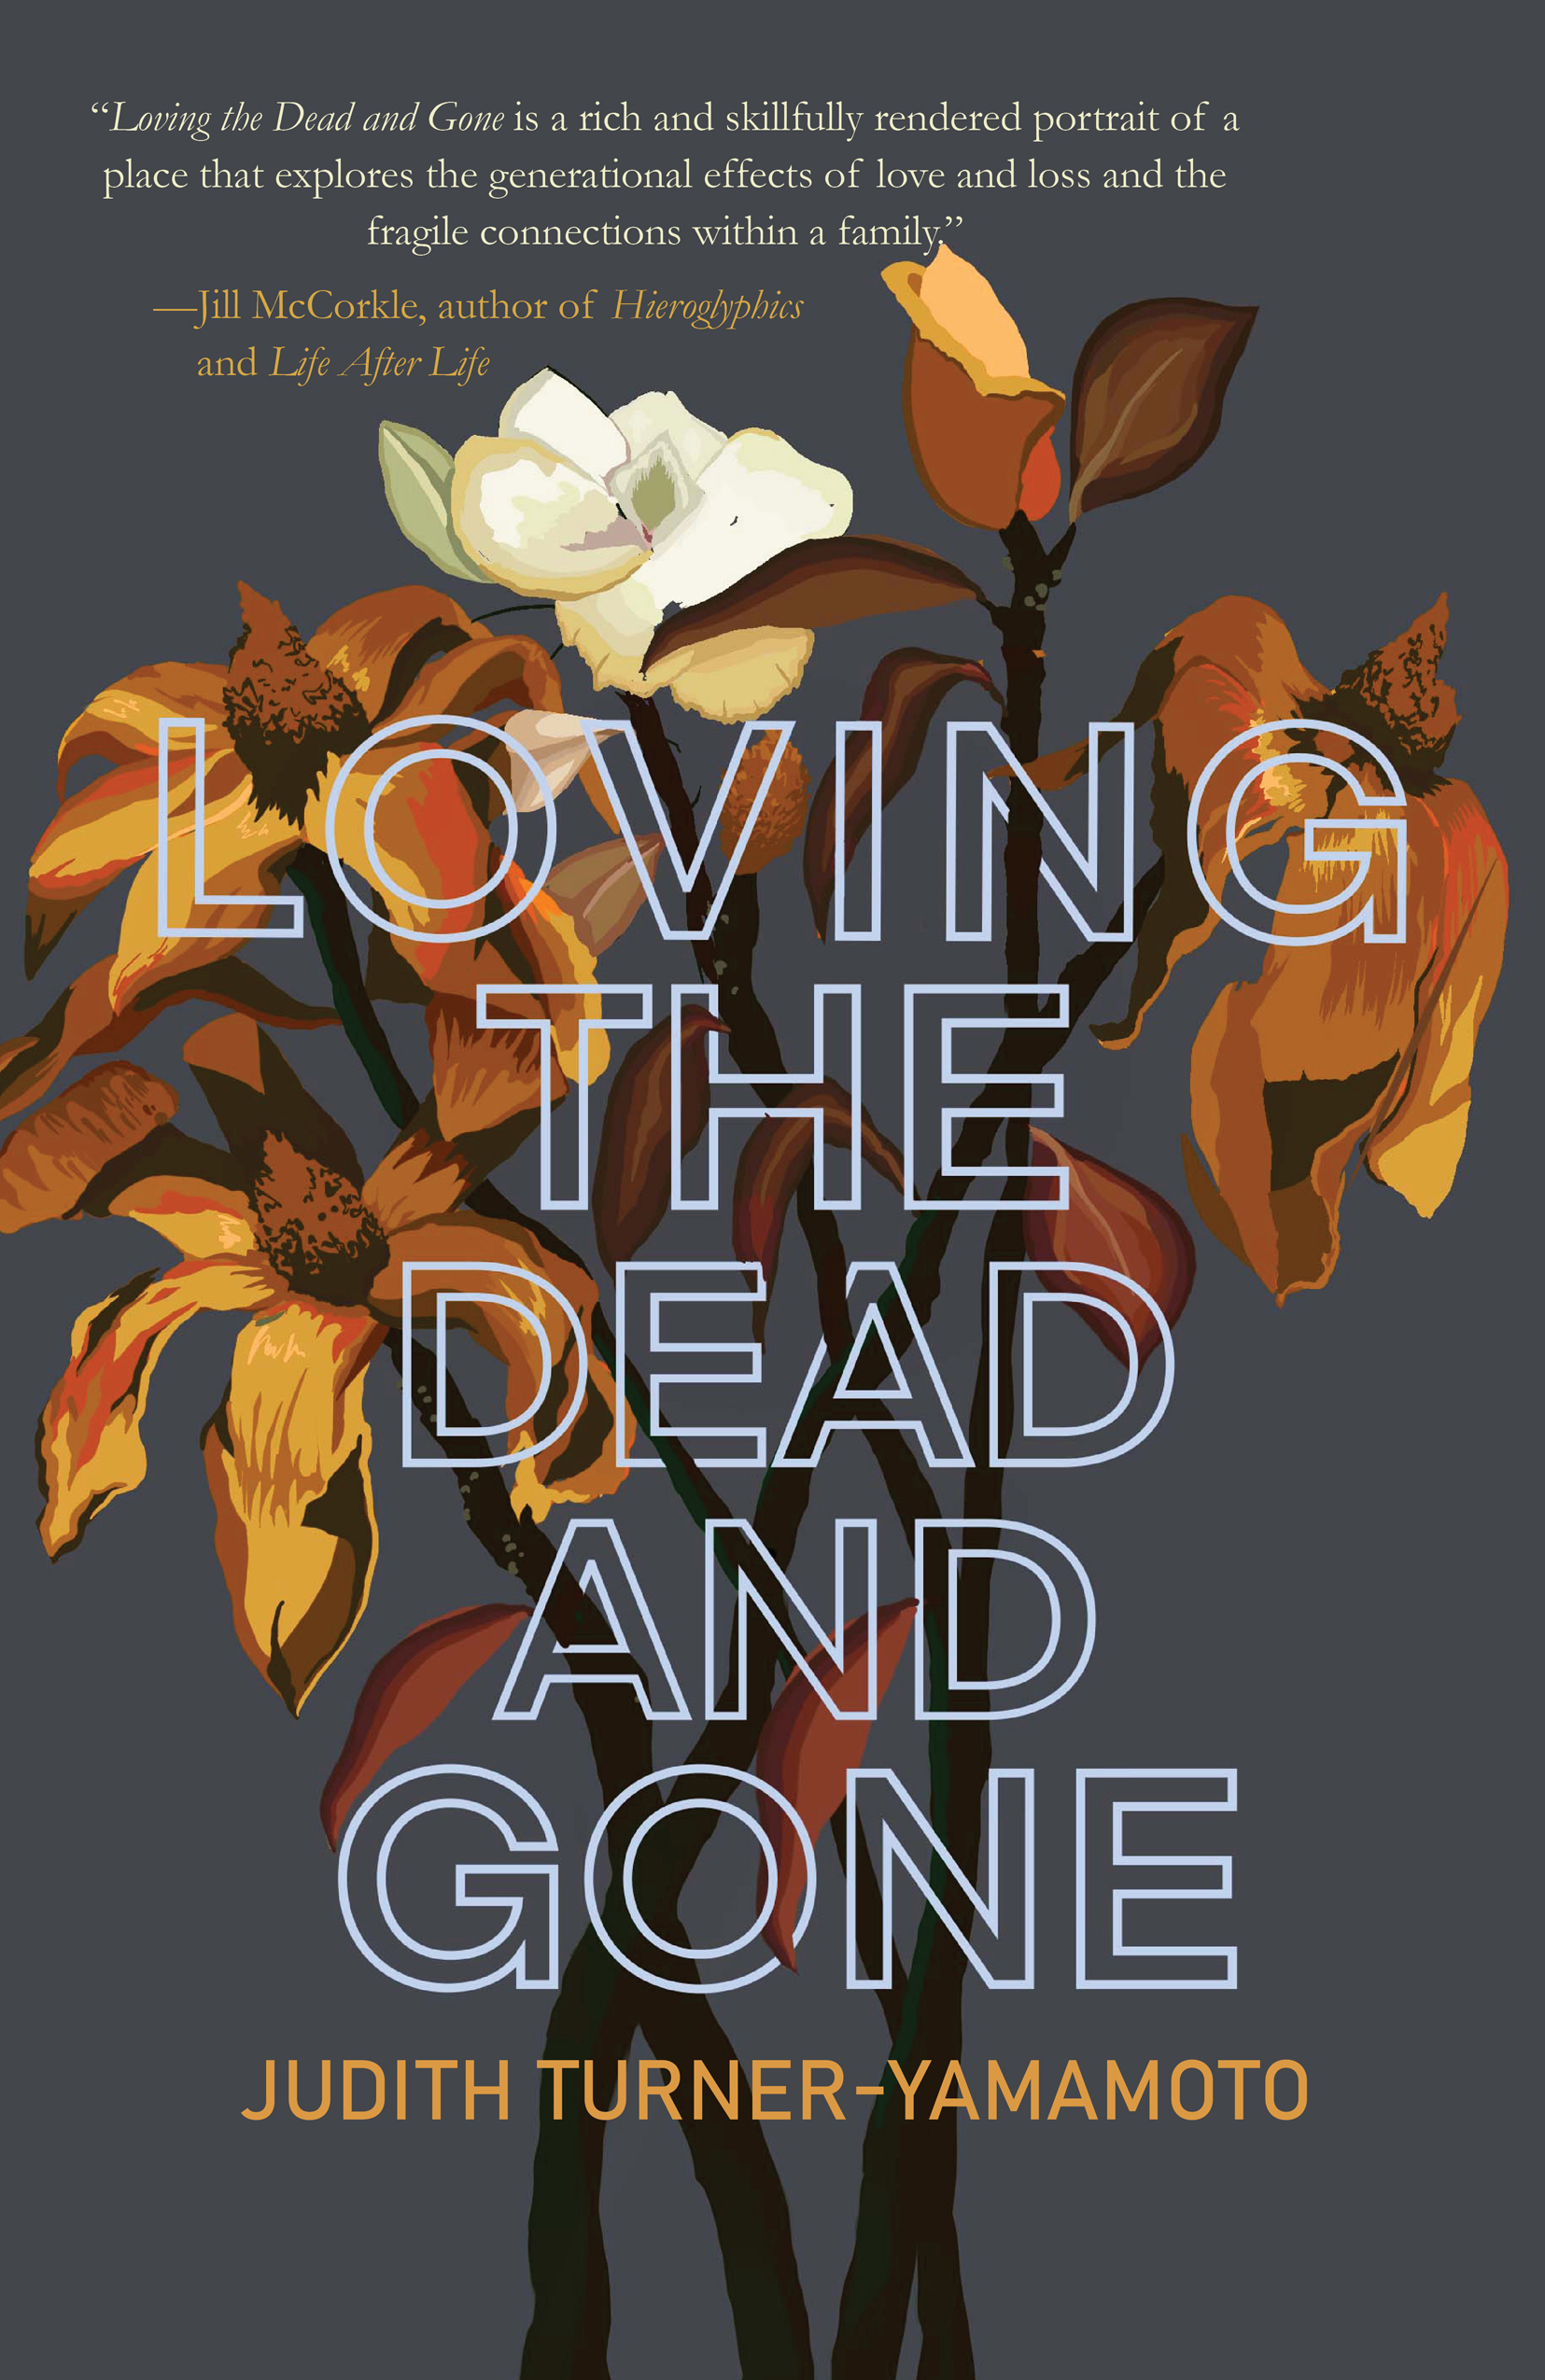 Loving the Dead and Gone By Judith Turner-Yamamoto